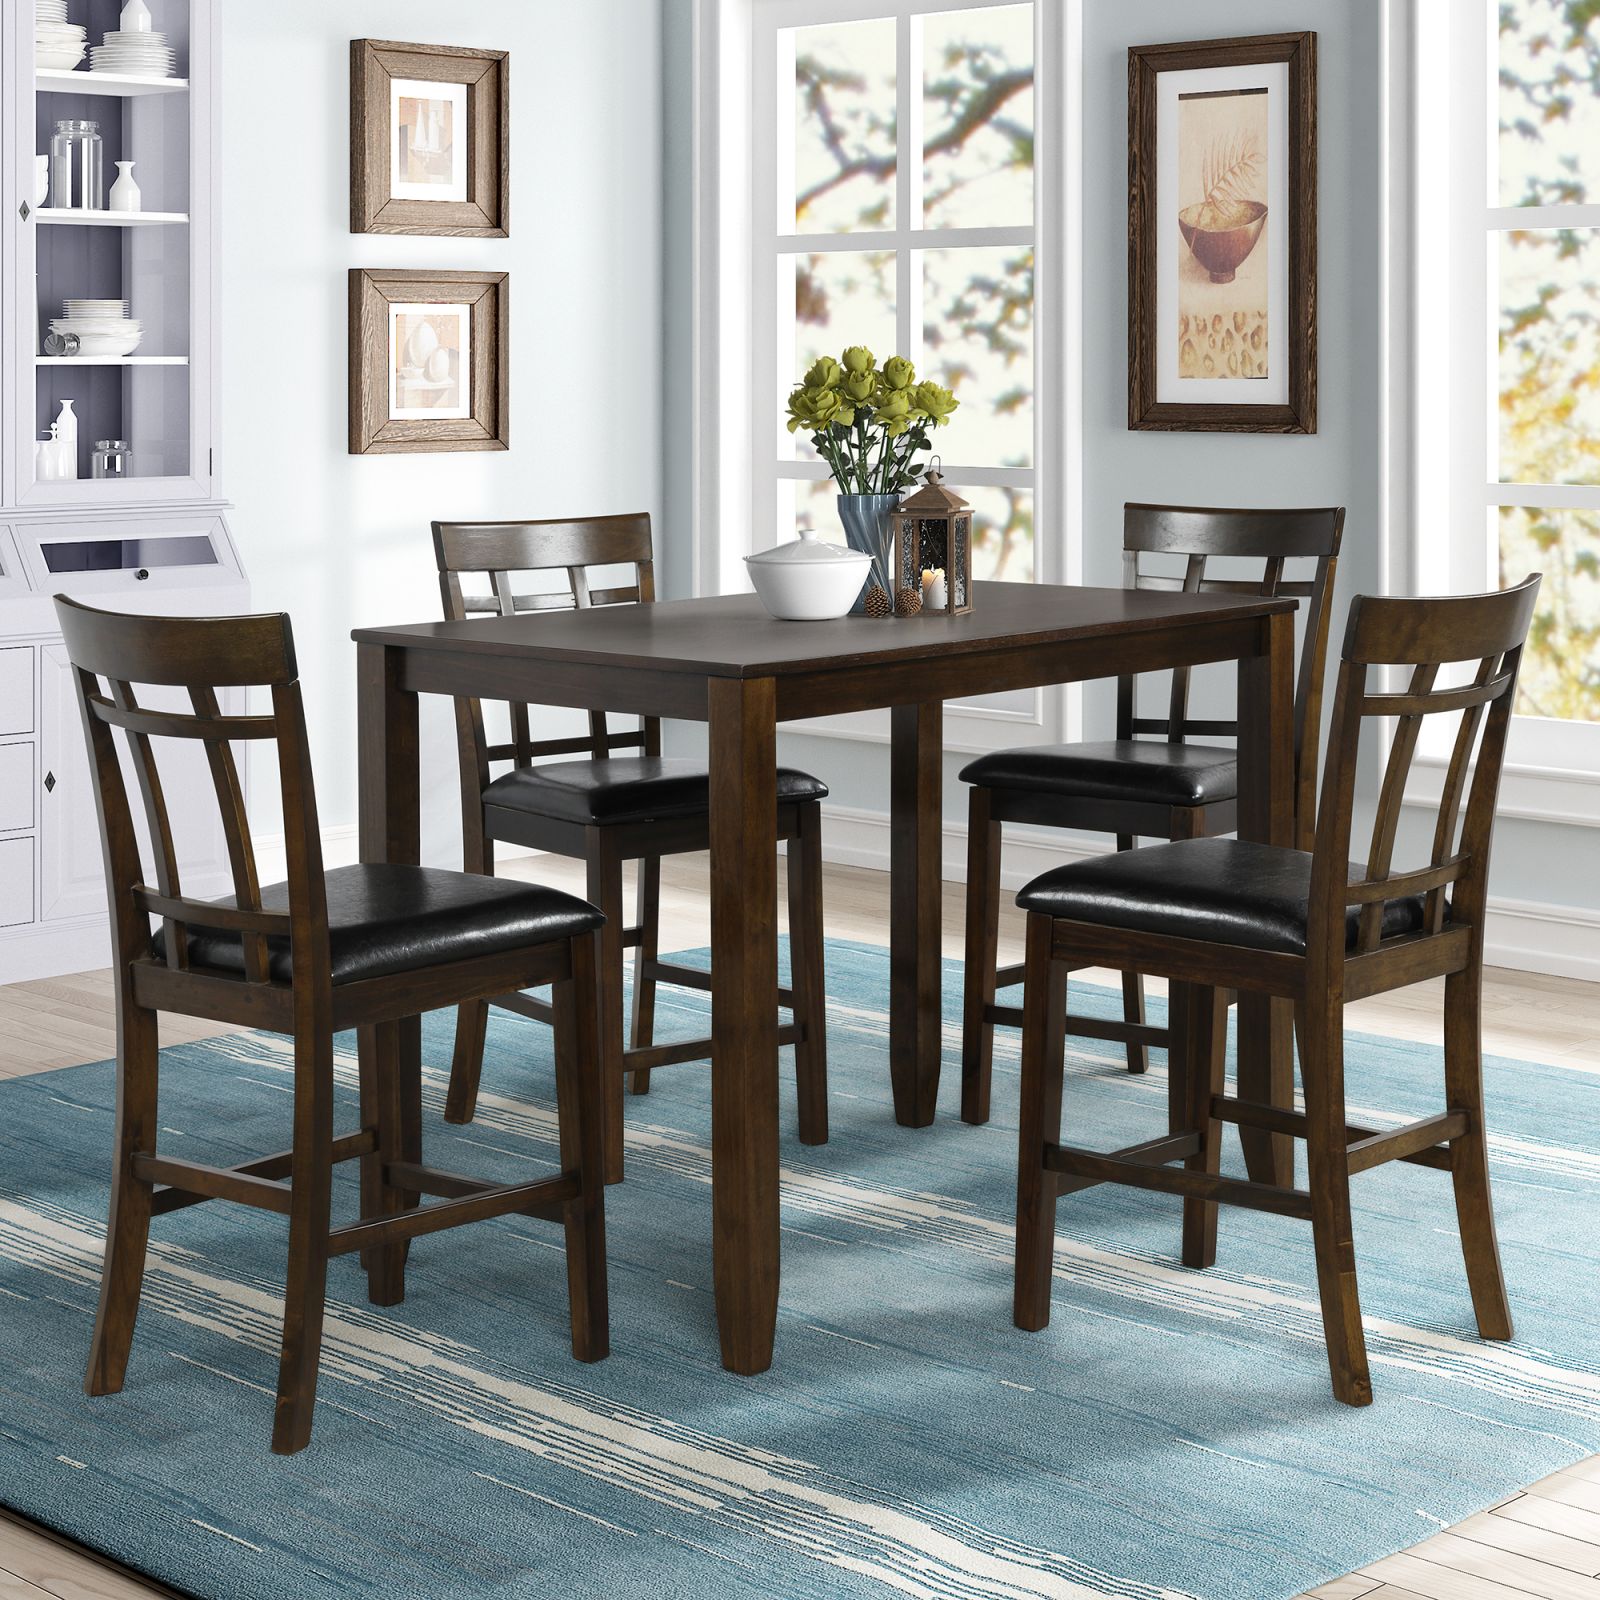  Best Kitchen Table And Chairs Heavy Duty 